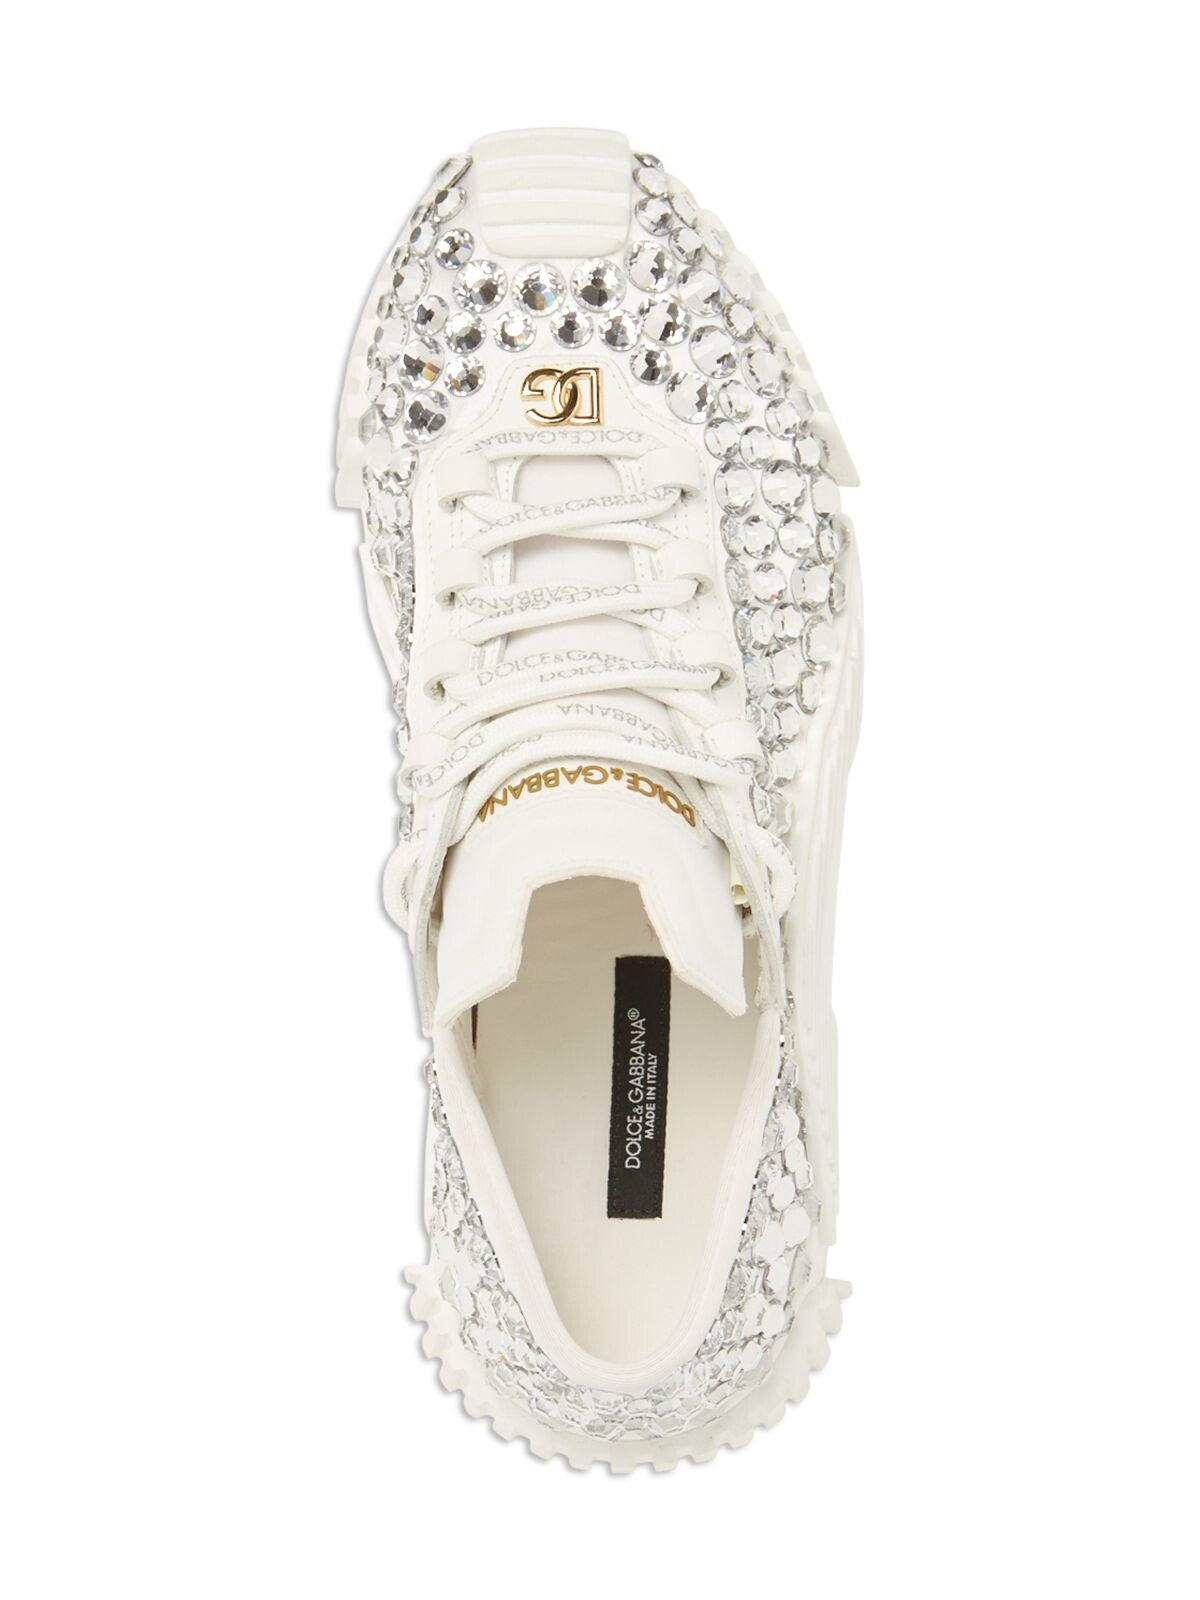 DOLCE & GABBANA Womens White Rhinestone Removable Insole Round Toe Wedge Lace-Up Leather Athletic Sneakers Shoes 38